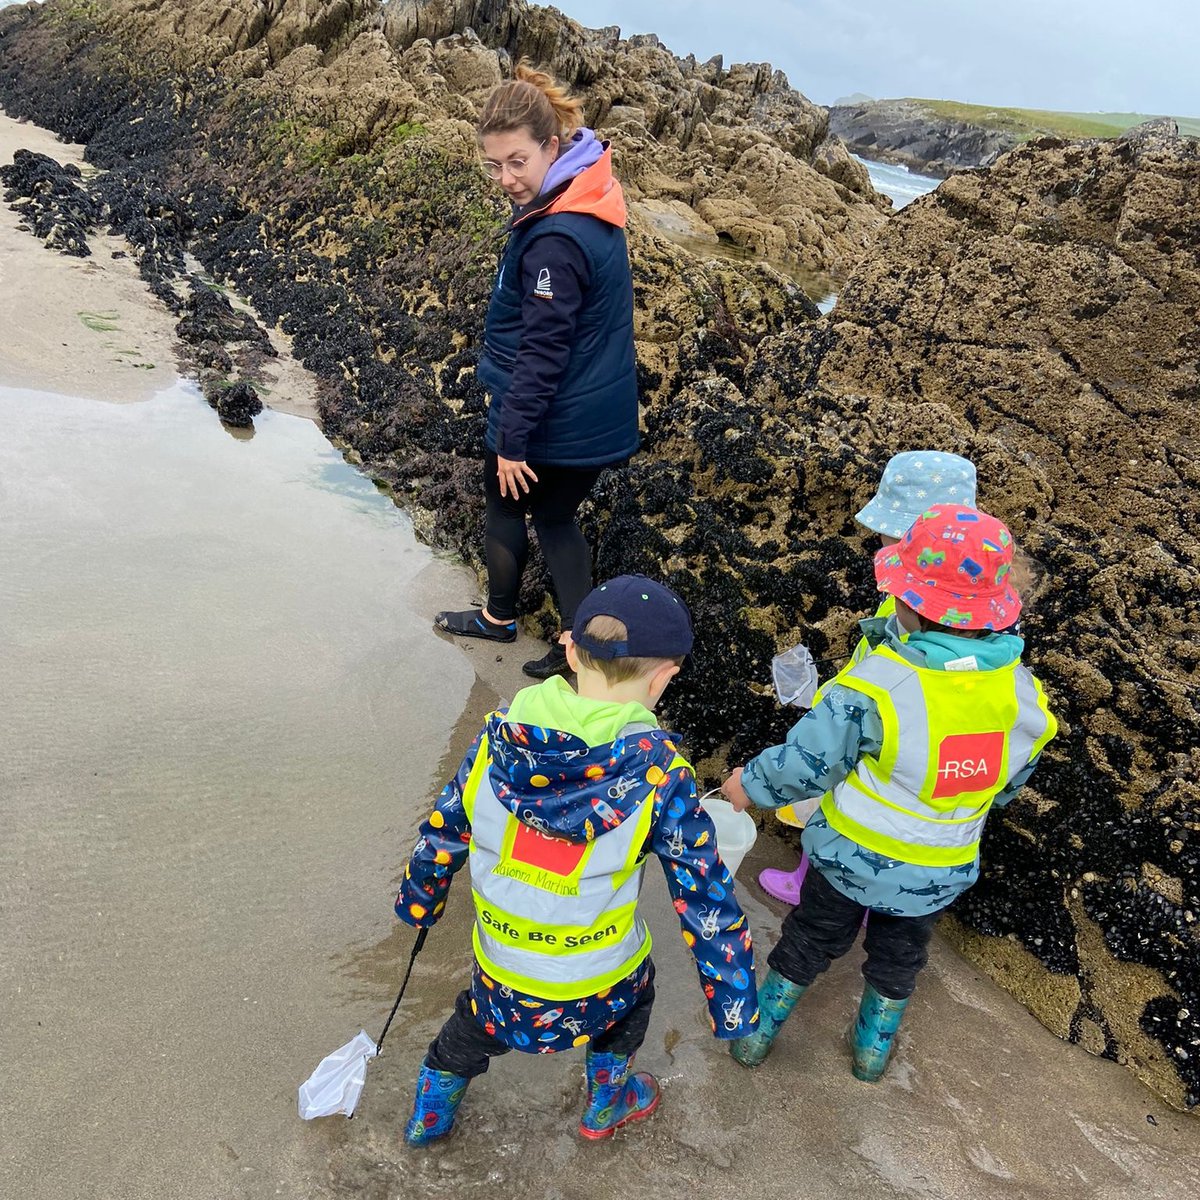 Nice day out at St Finians Bay last Monday with Glen Pre School for a seashore safari!🦀🦐 #seasynergy #seasynergyireland #rockpooling #seashore #seashoresafari #marineawareness #marineconservation #keepexploring #wildatlanticway #kerry #whatsoninwaterville #activitycenter